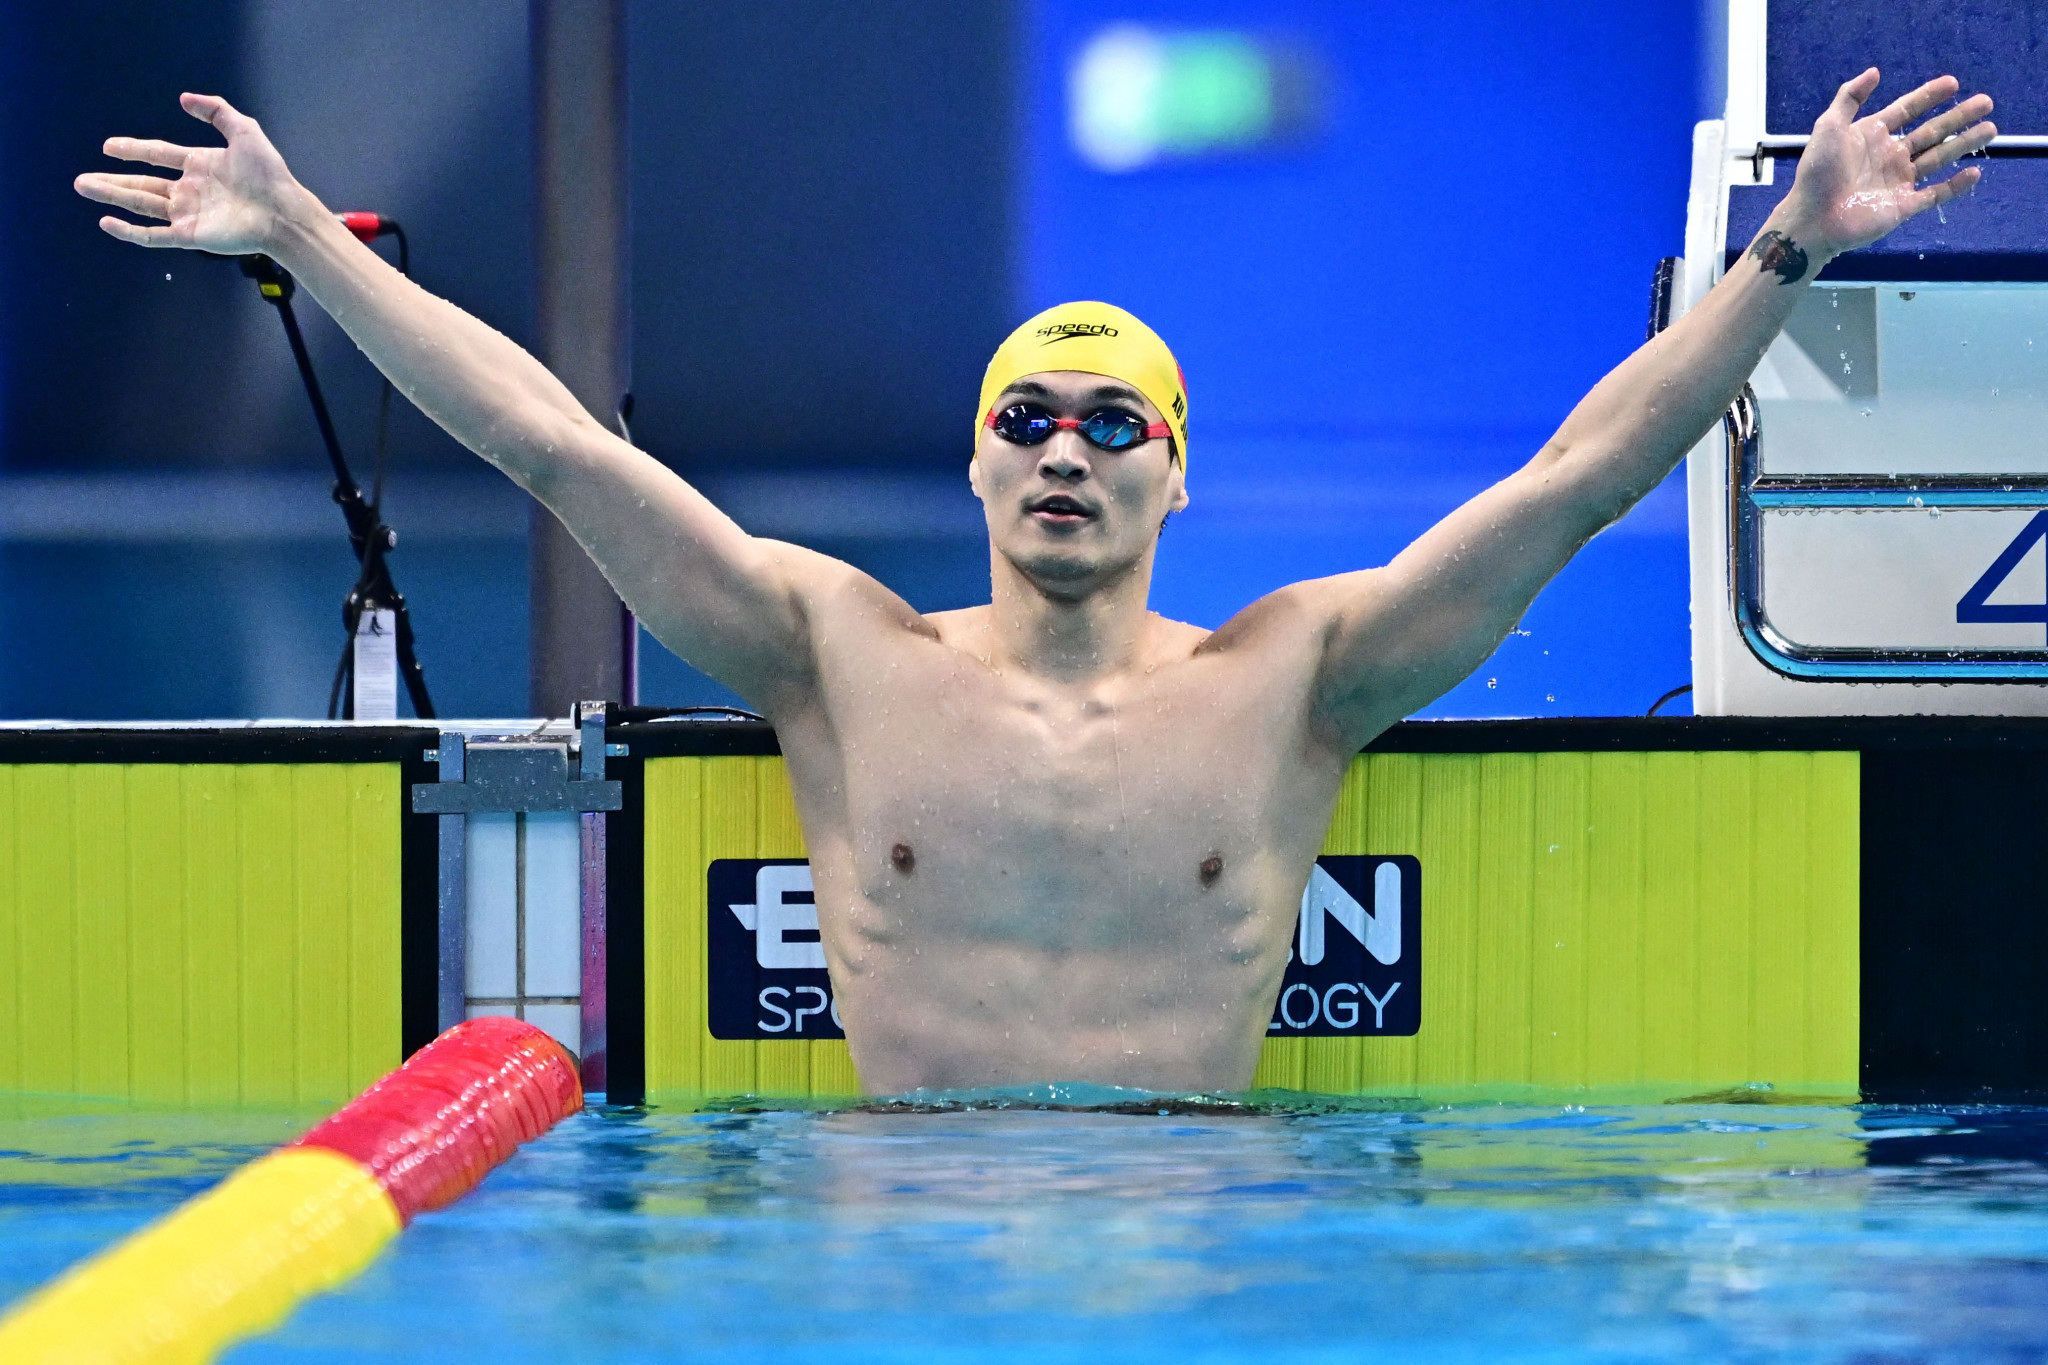 Xu Jiayu broke the Asian Games record in the men's 100m backstroke swimming final after 52.23 seconds ©Getty Images